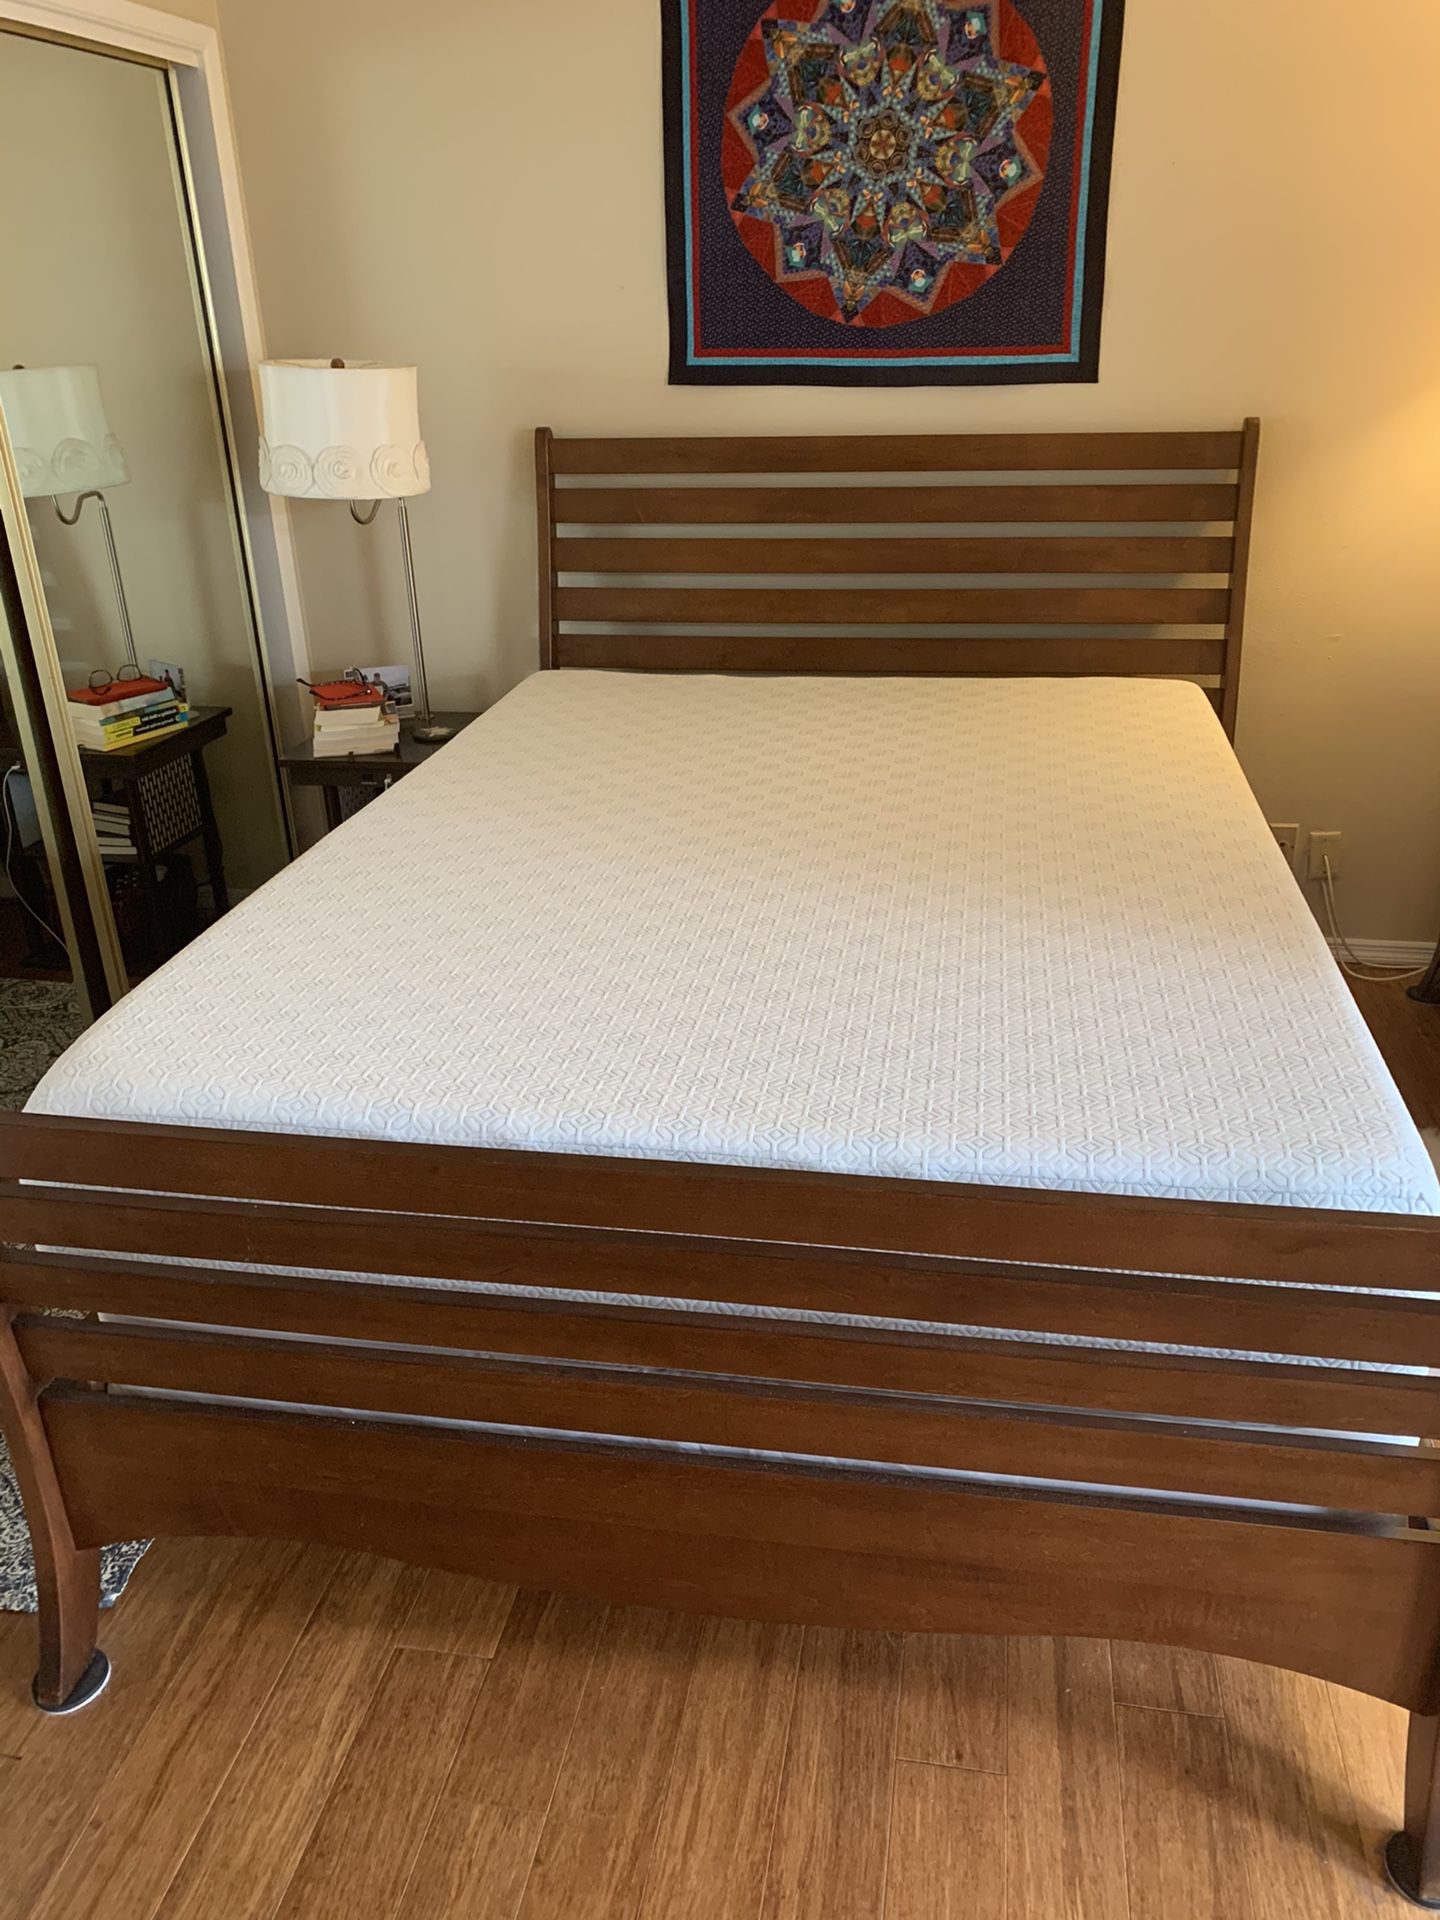 Queen sleigh bed frame (mattress not included)